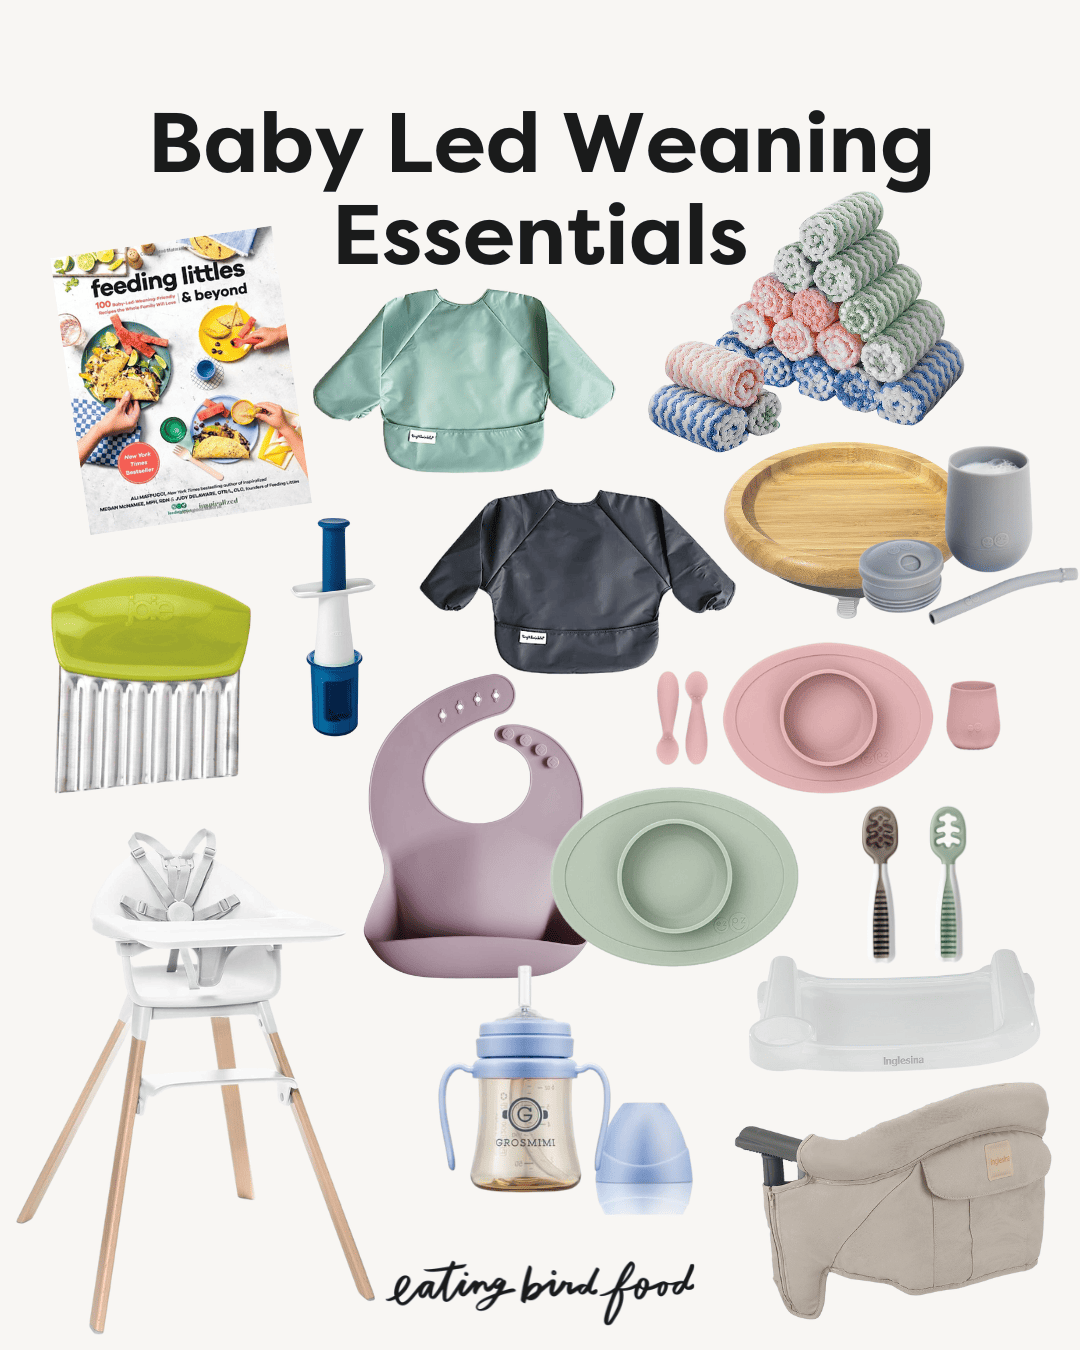 A collage with lots of items that are great for baby-led weaning.